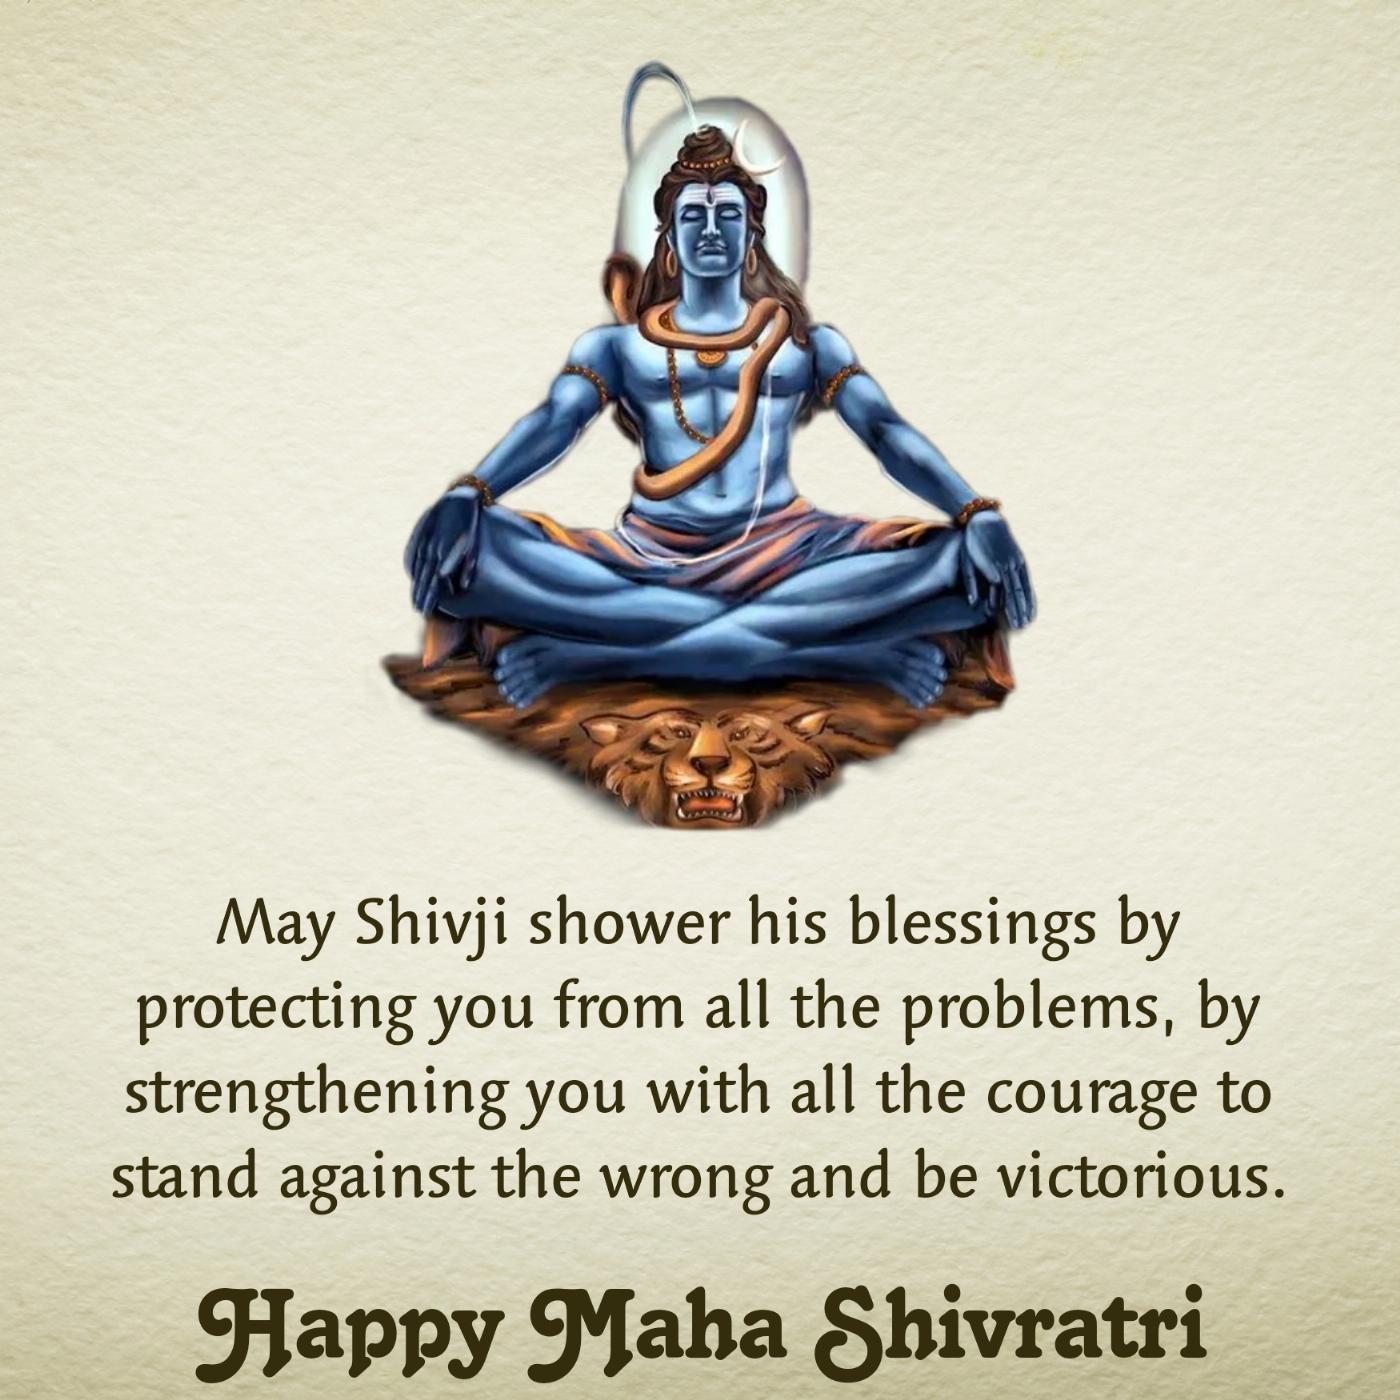 May Shivji shower his blessings by protecting you from all the problems